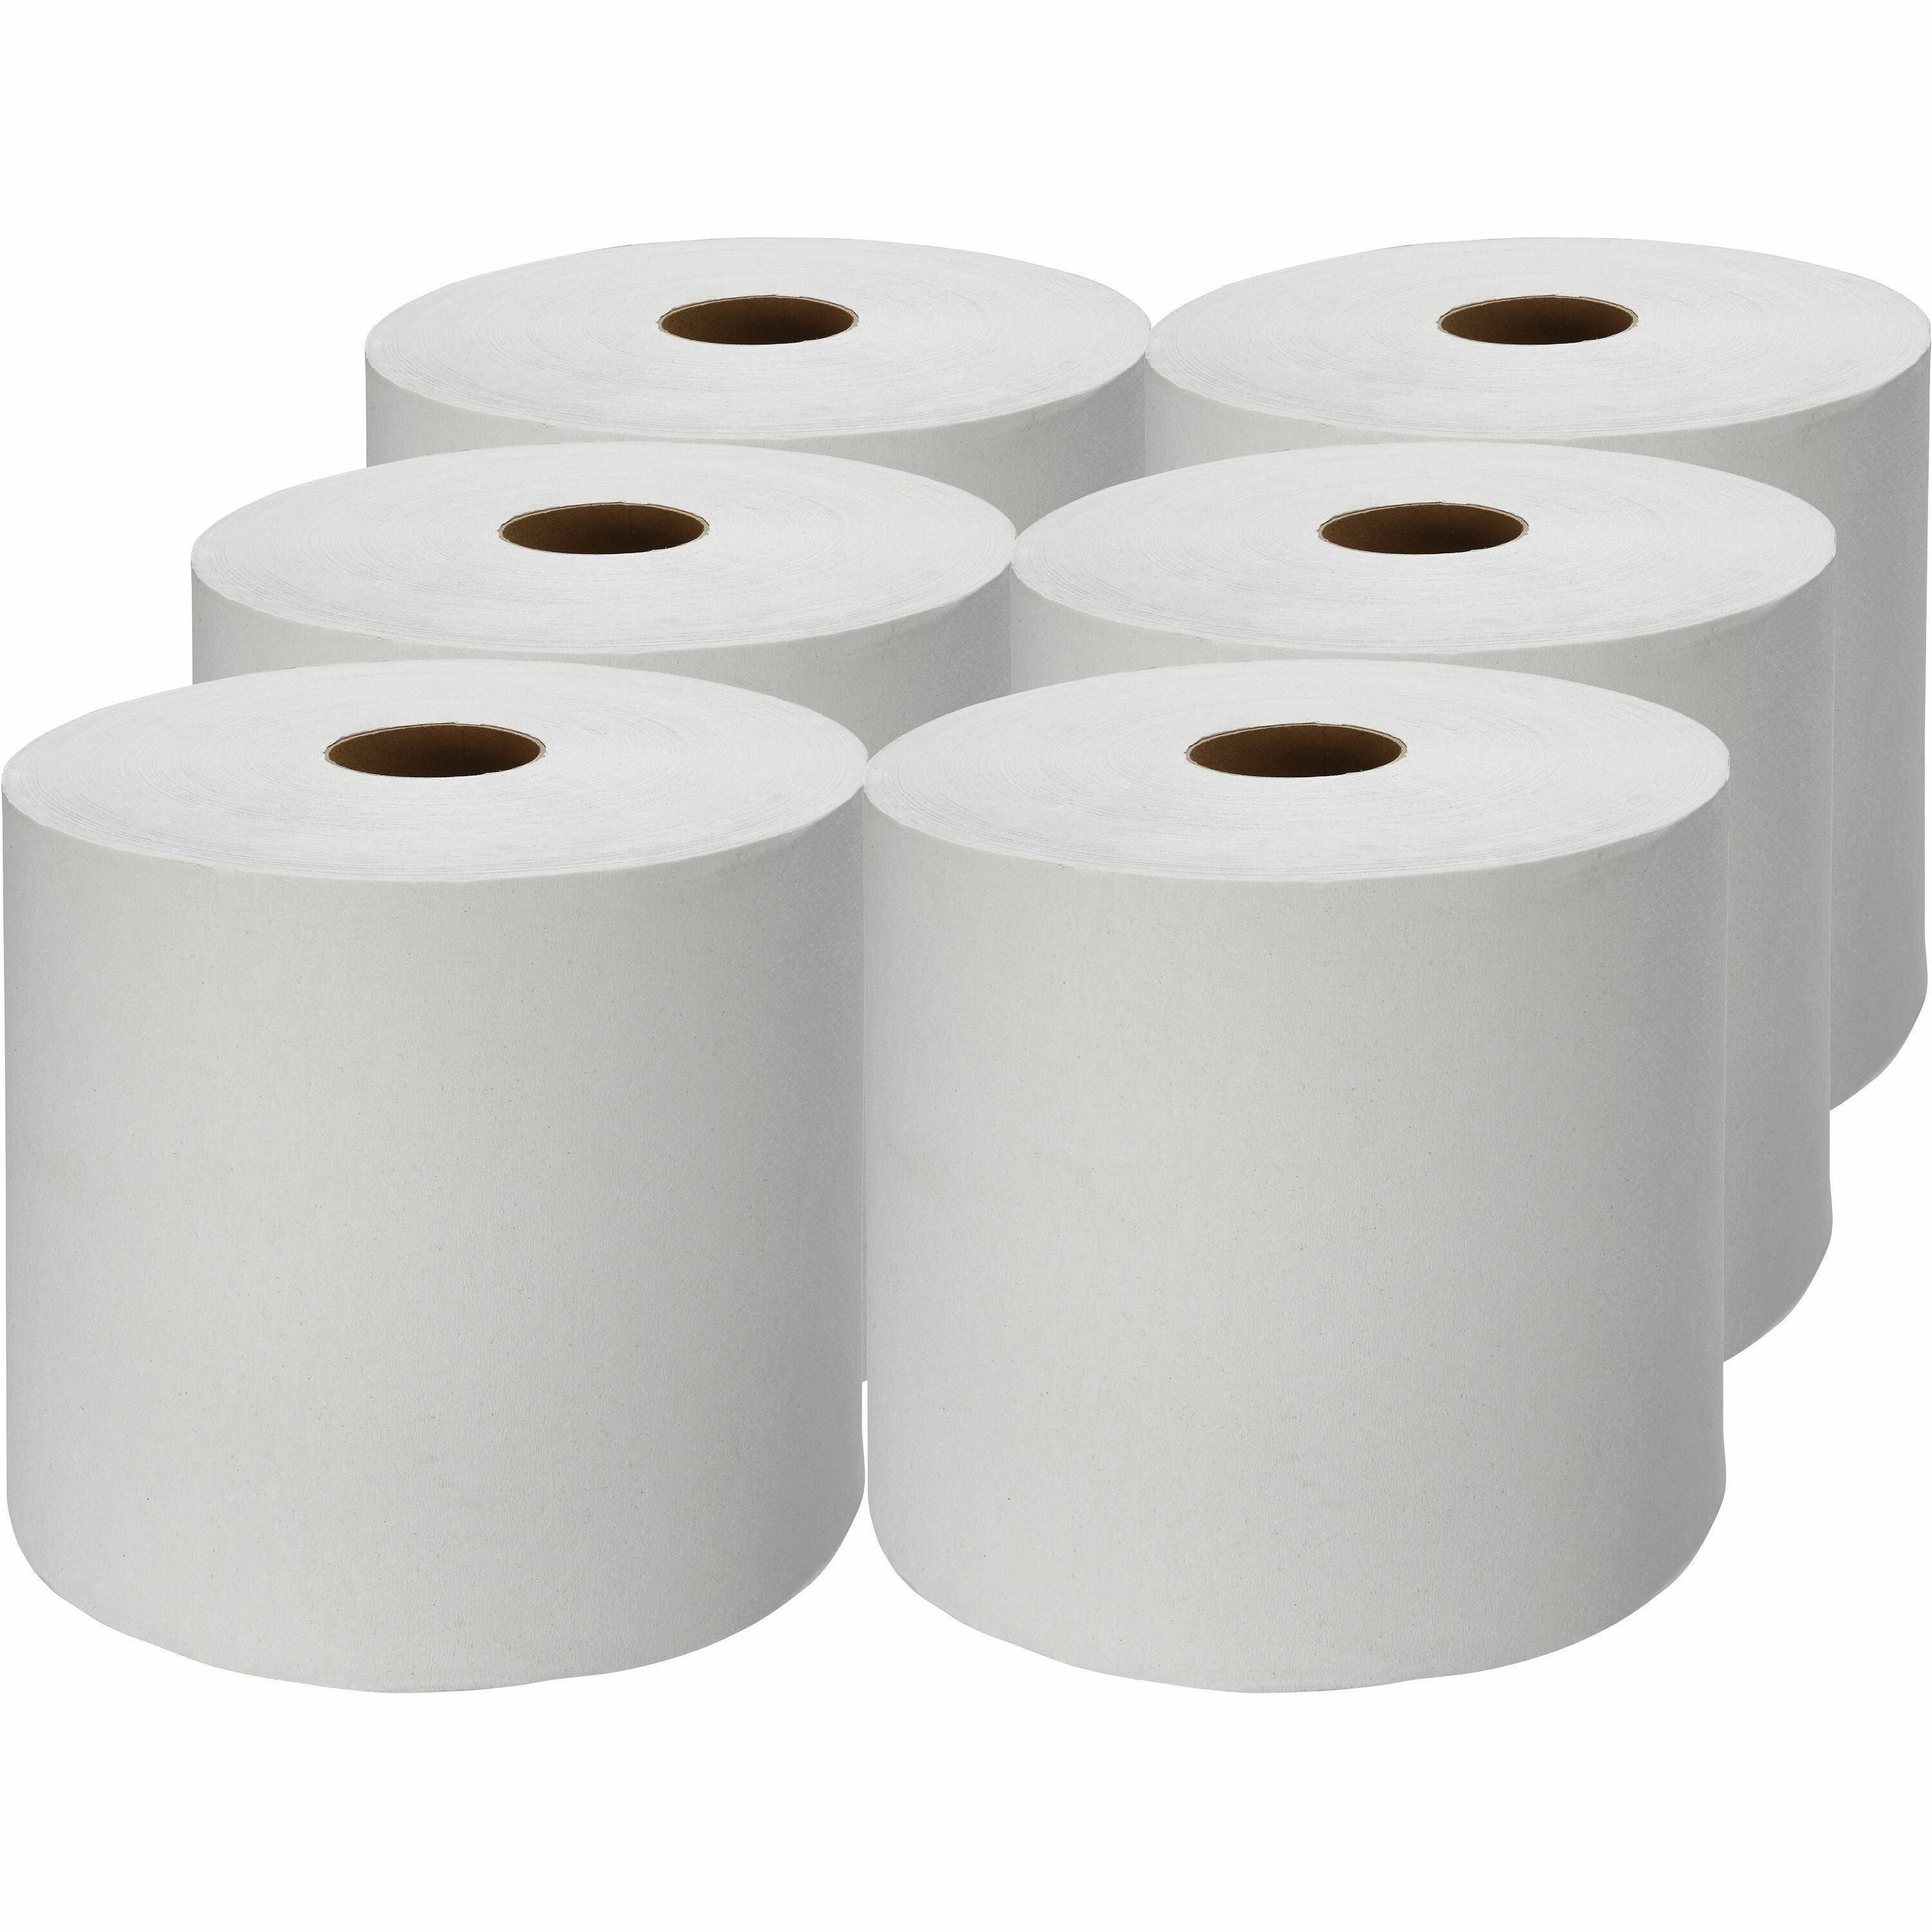 genuine-joe-hardwound-roll-paper-towels-788-x-1000-ft-2-core-white-absorbent-embossed-designed-for-restroom-6-carton_gjo22900 - 1